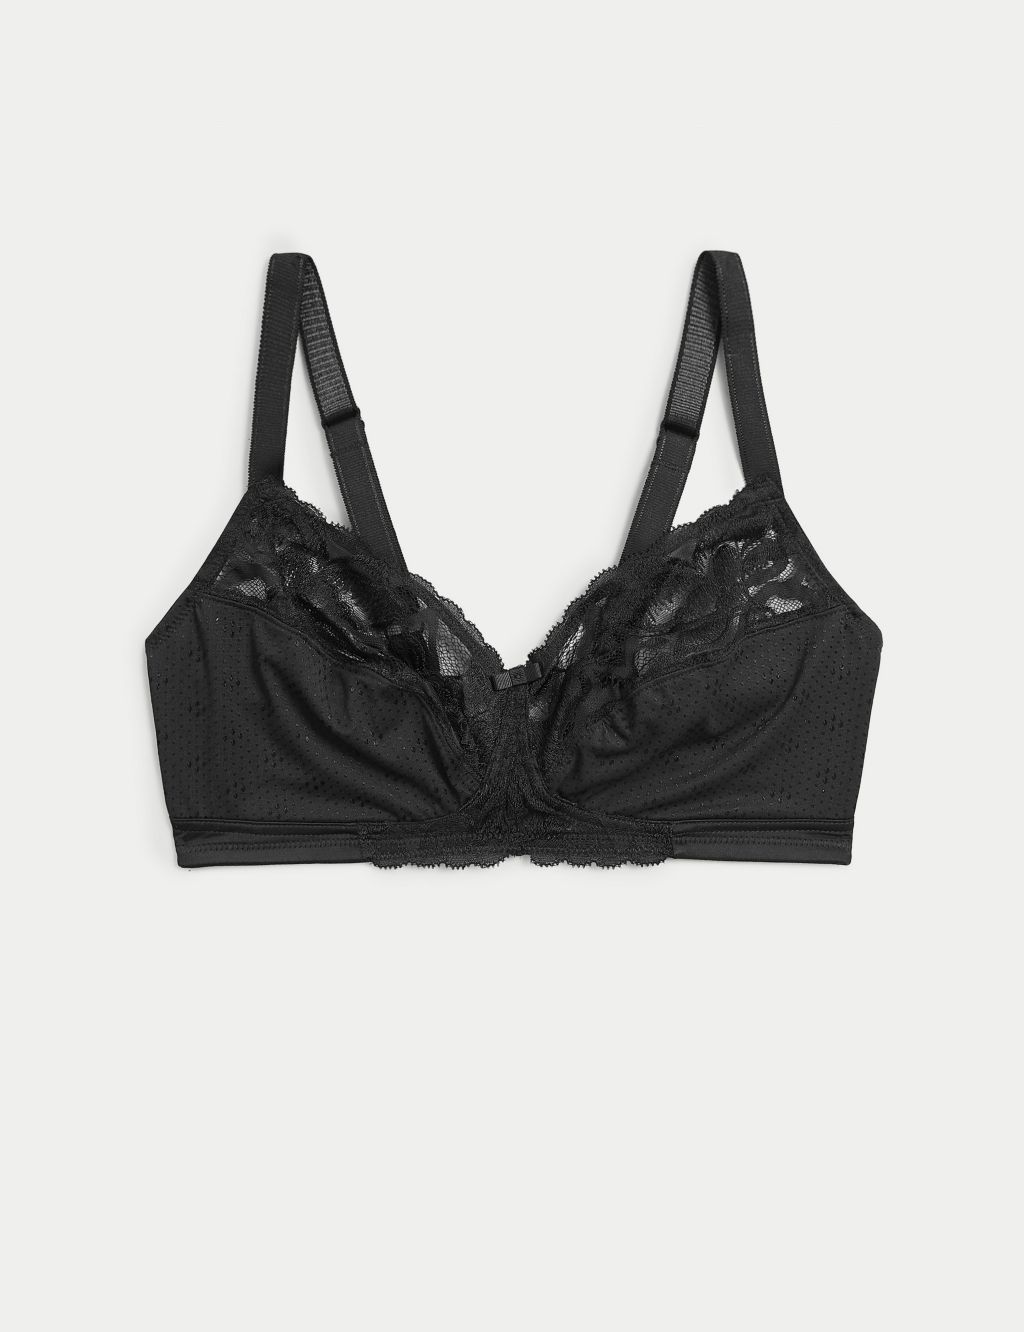 M&S Wild Blooms Almond Non-Wired Lace Bralette UK 34D